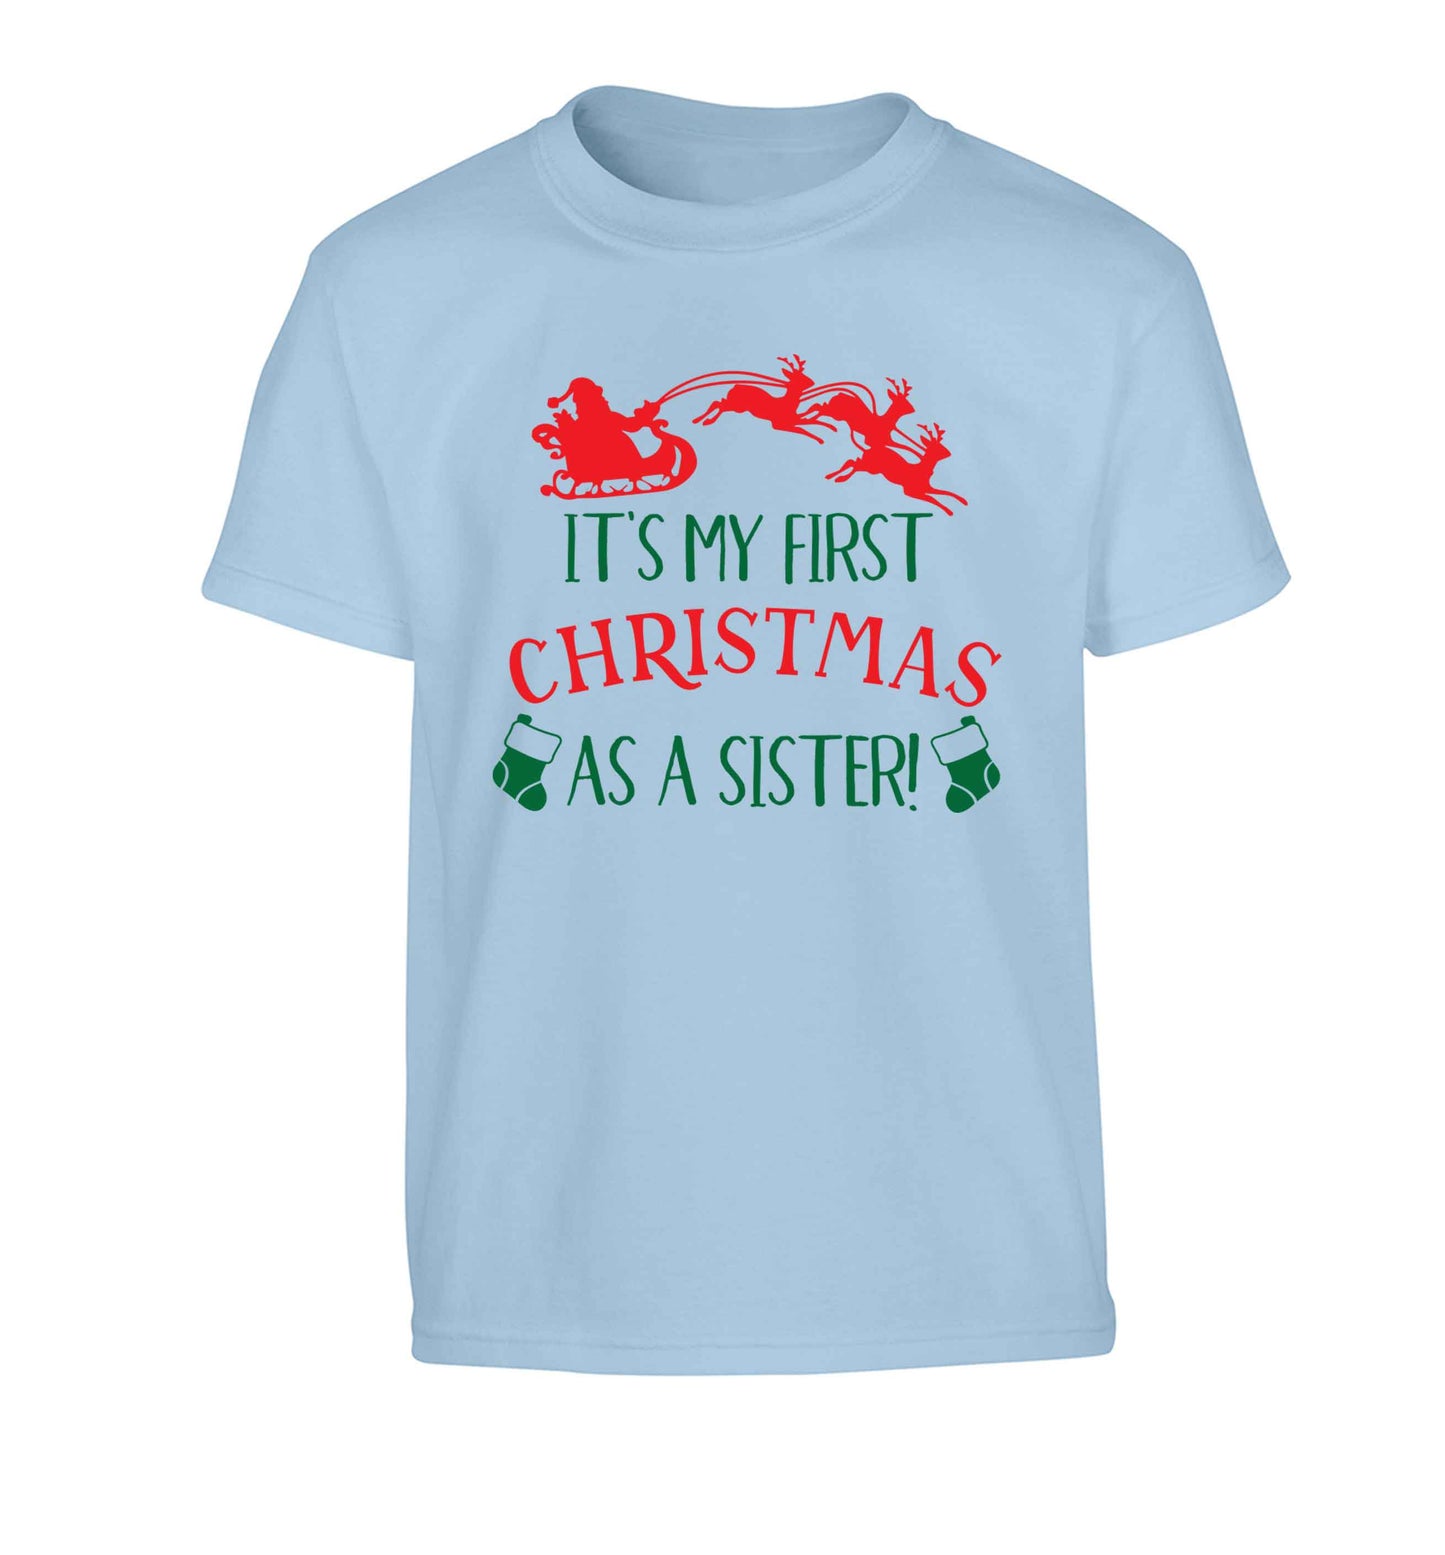 It's my first Christmas as a sister! Children's light blue Tshirt 12-13 Years